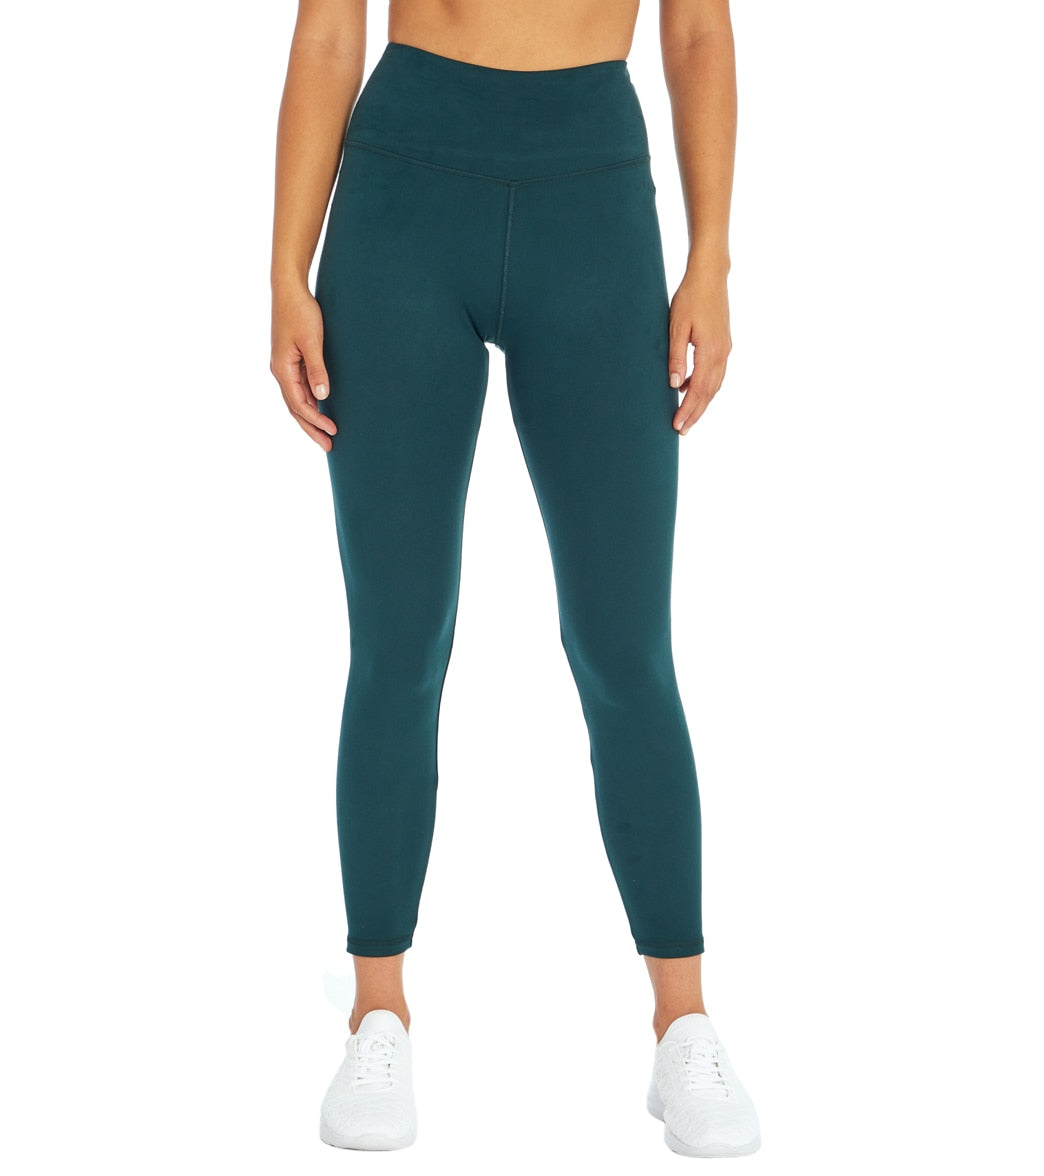 Balance Collection Contender Lux Yoga Leggings, 57% OFF